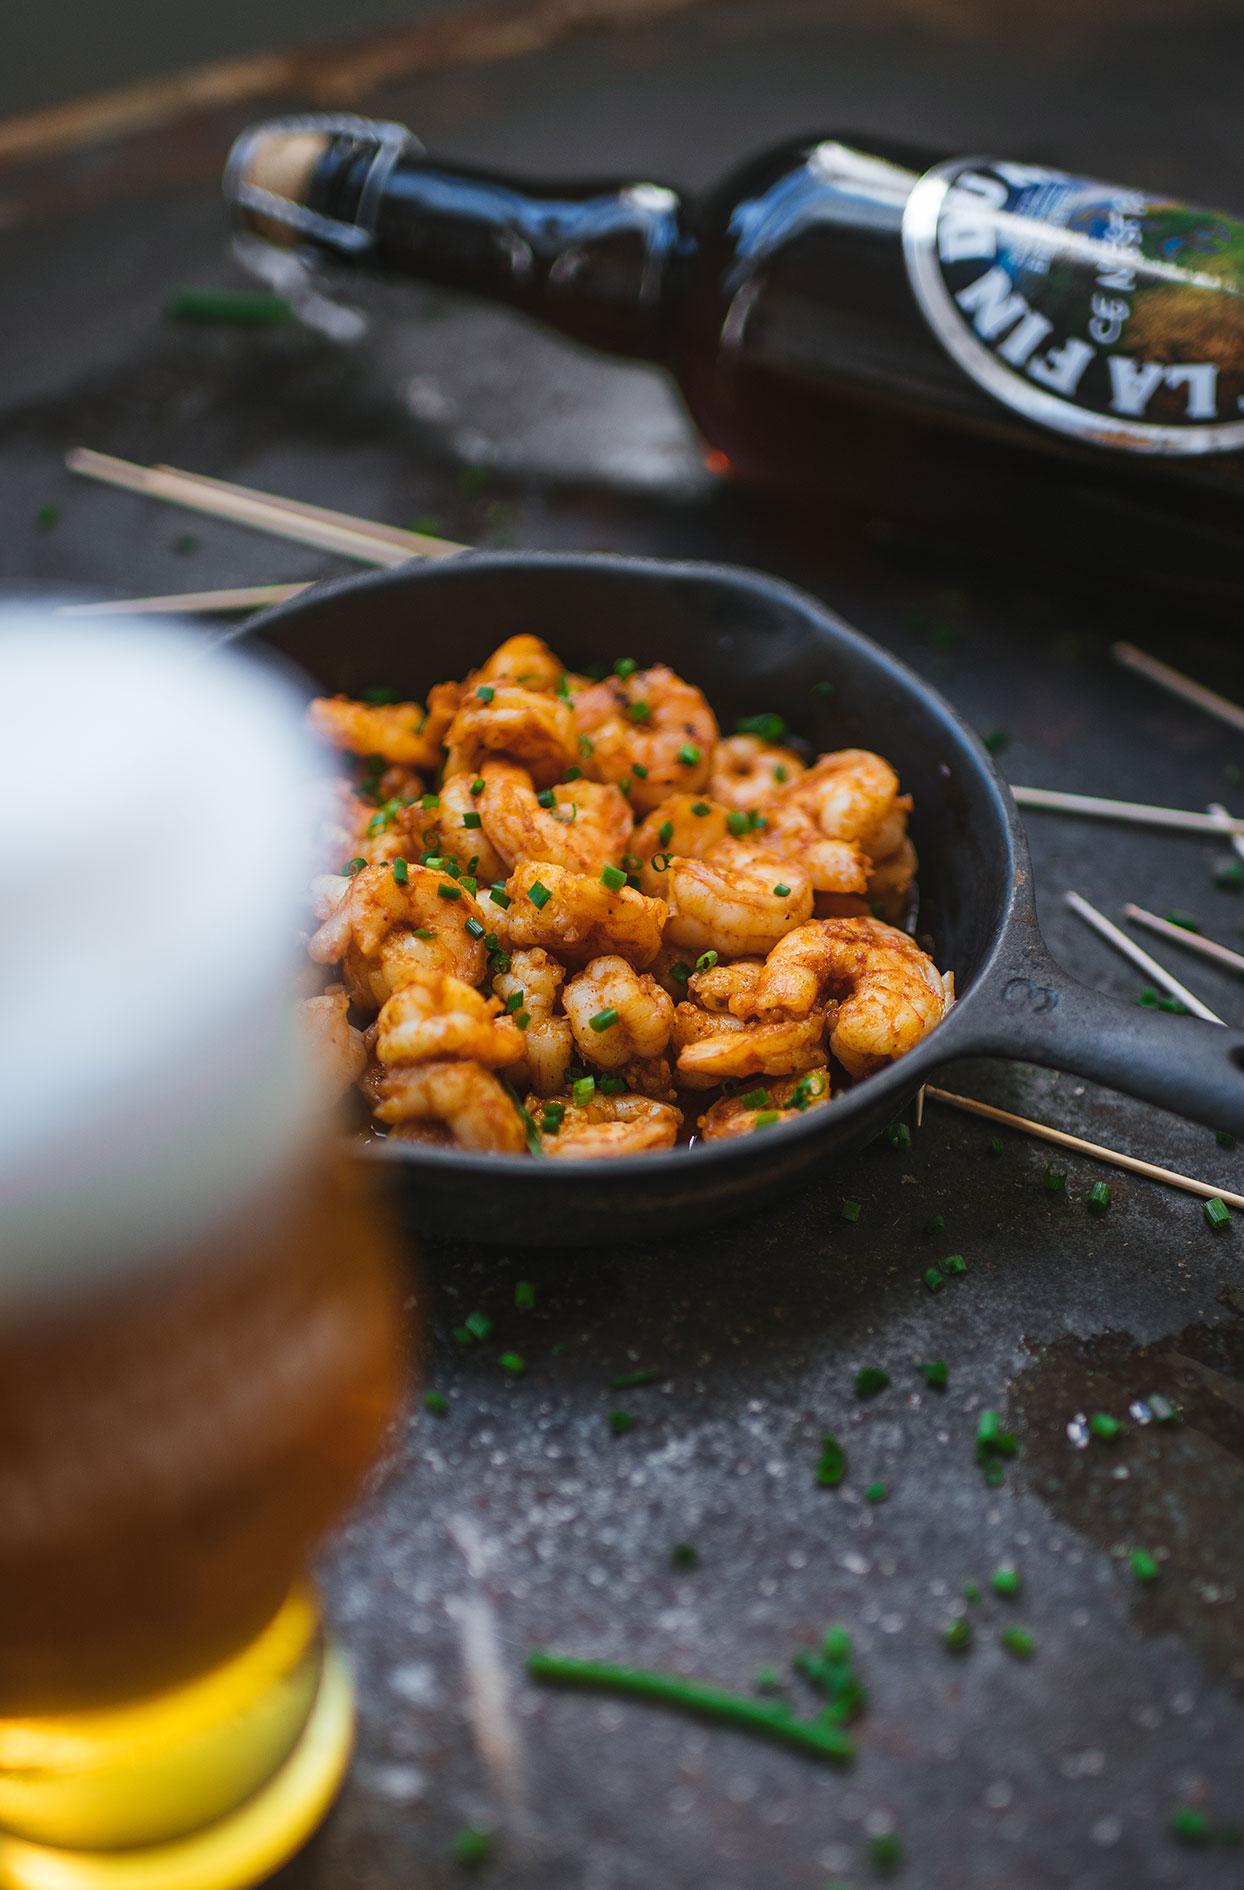 Sauteed shrimps with garlic and beer